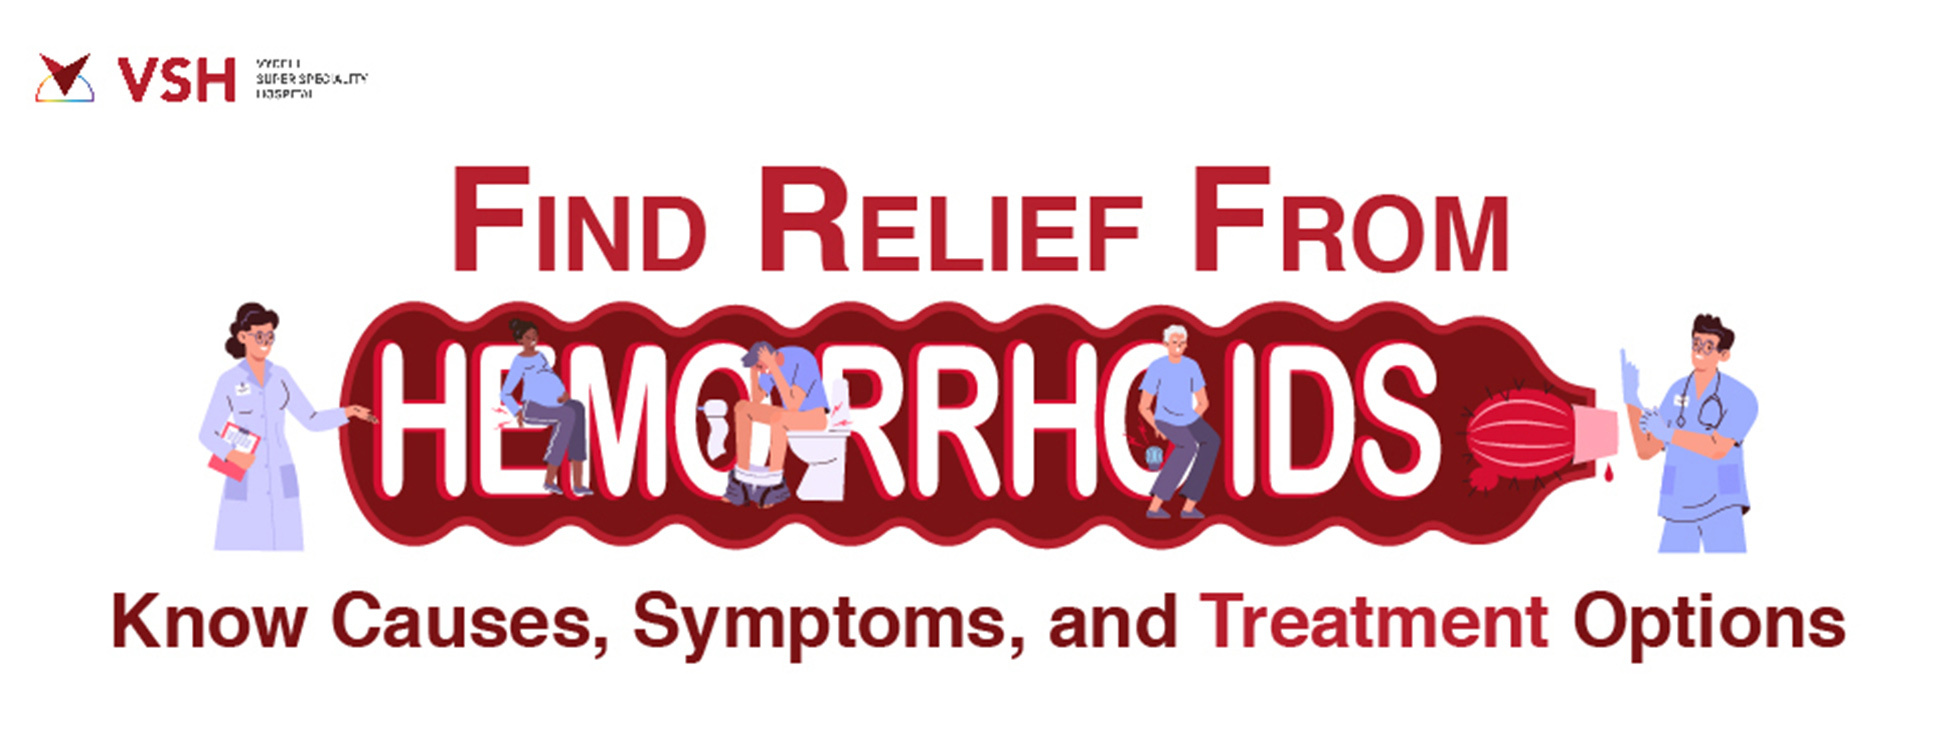 Hemorrhoids: Causes, Symptoms, and Treatment Options